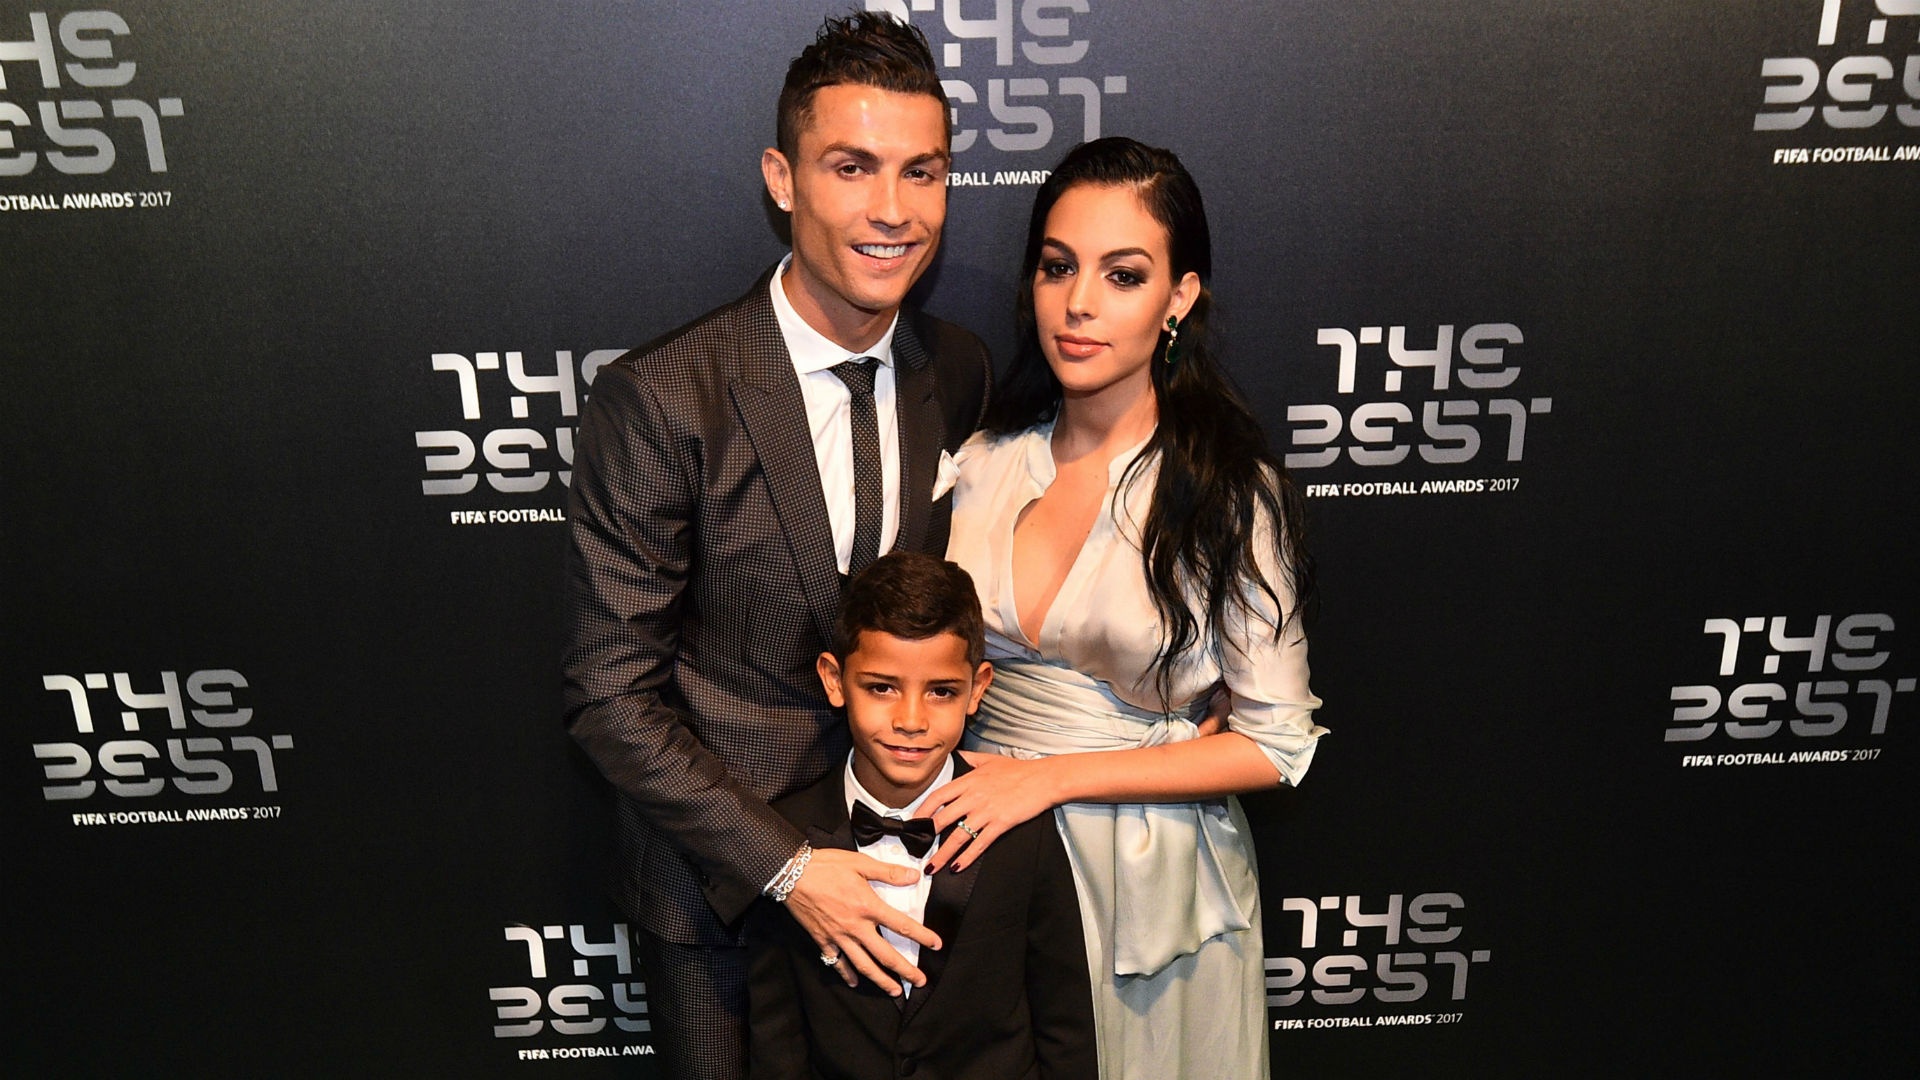 Cristiano Ronaldo and his wife image download